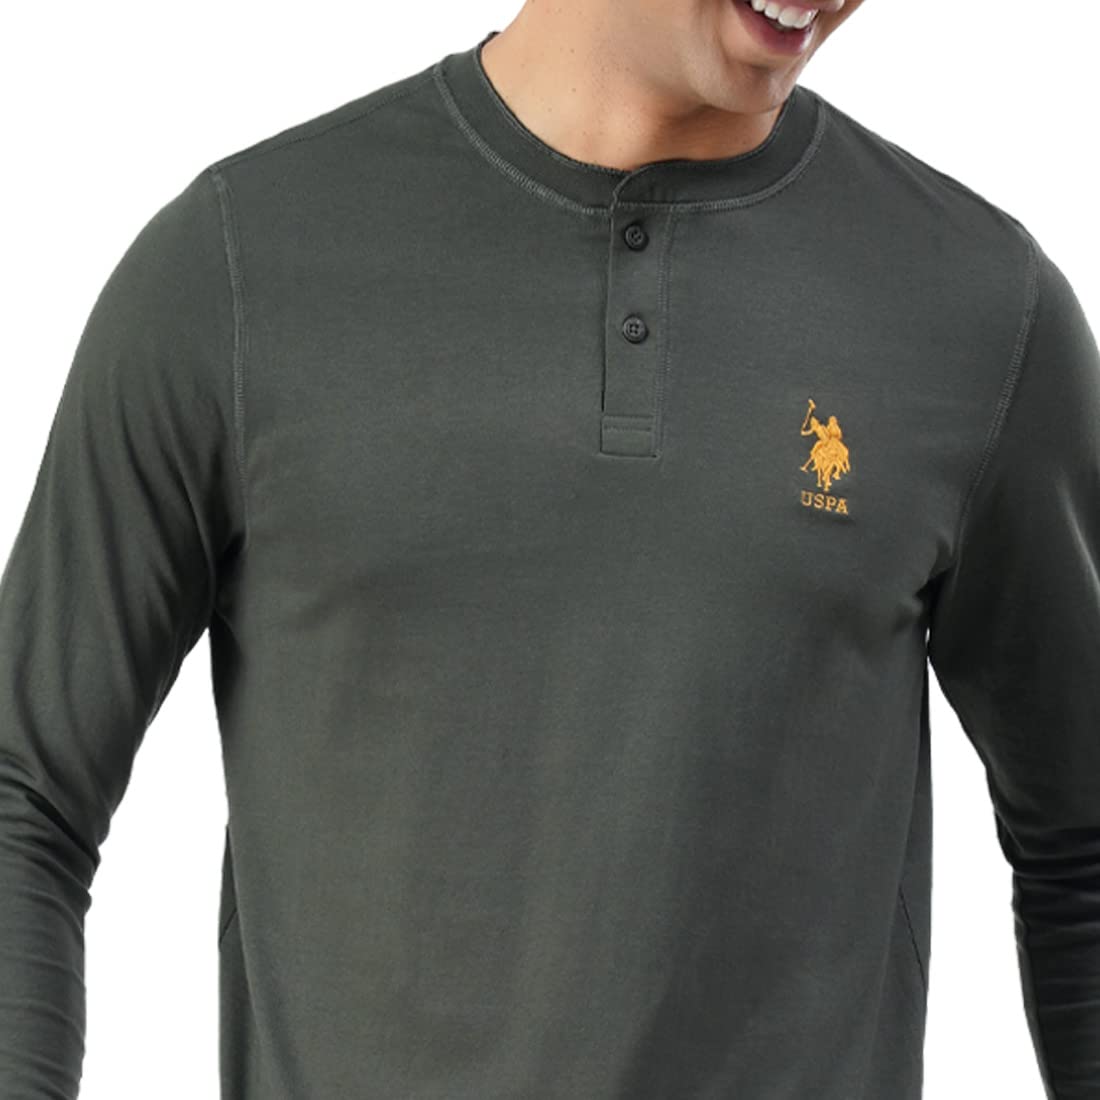 U.S. POLO ASSN. Men Comfort Fit Heathered Cotton I655 T-Shirt - Pack of 1 (Olive L)